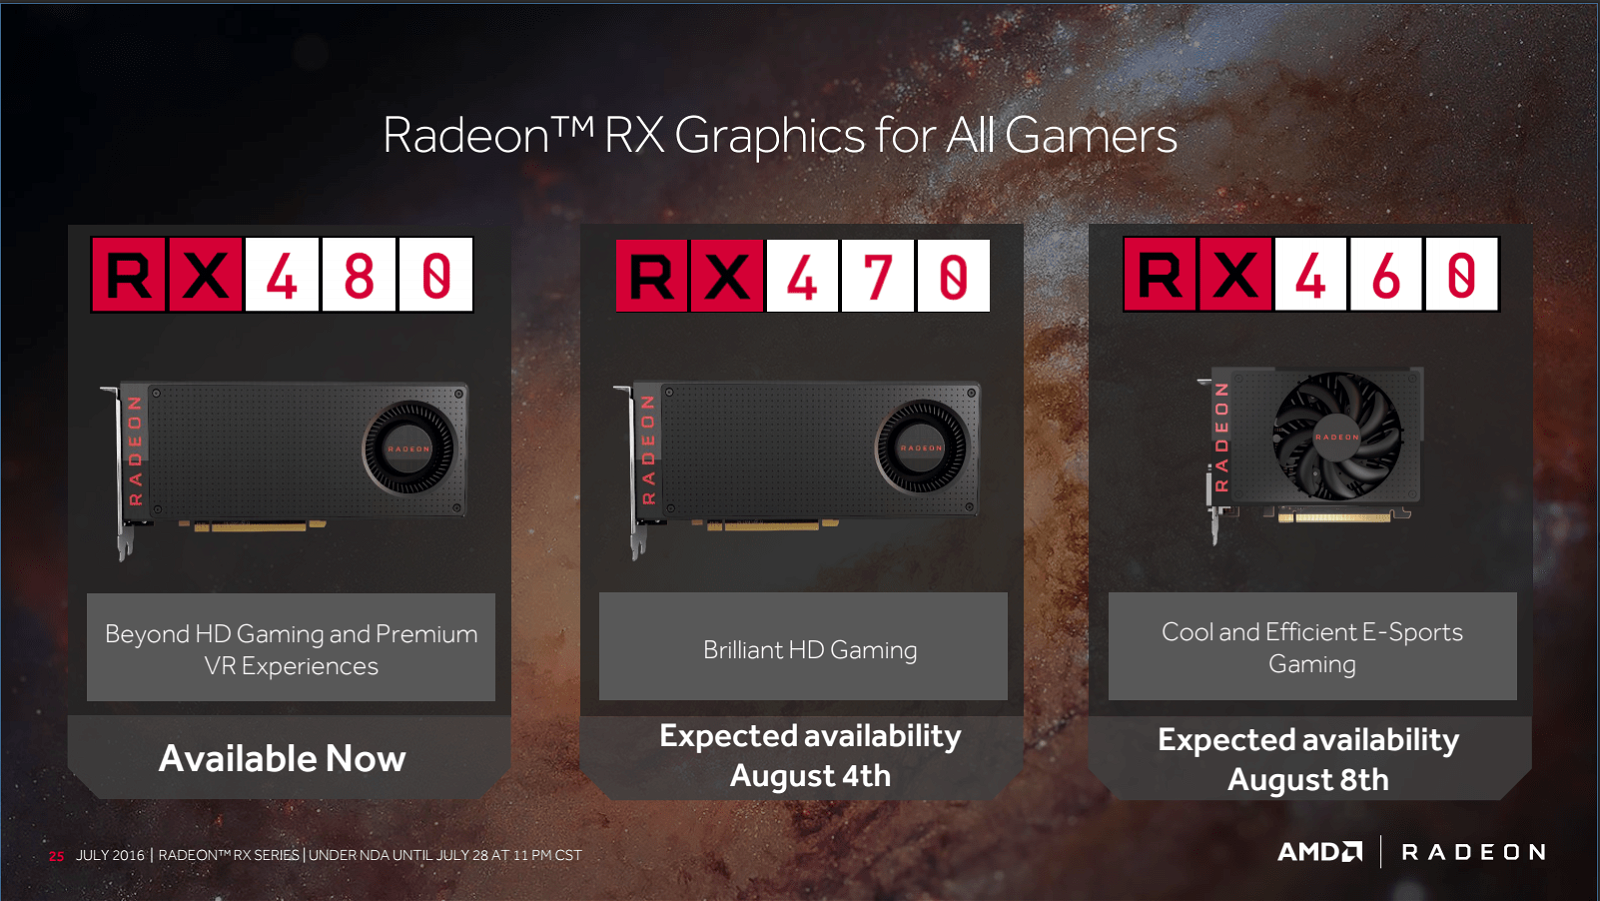 Amd Rx 470 And 460 Release Early August